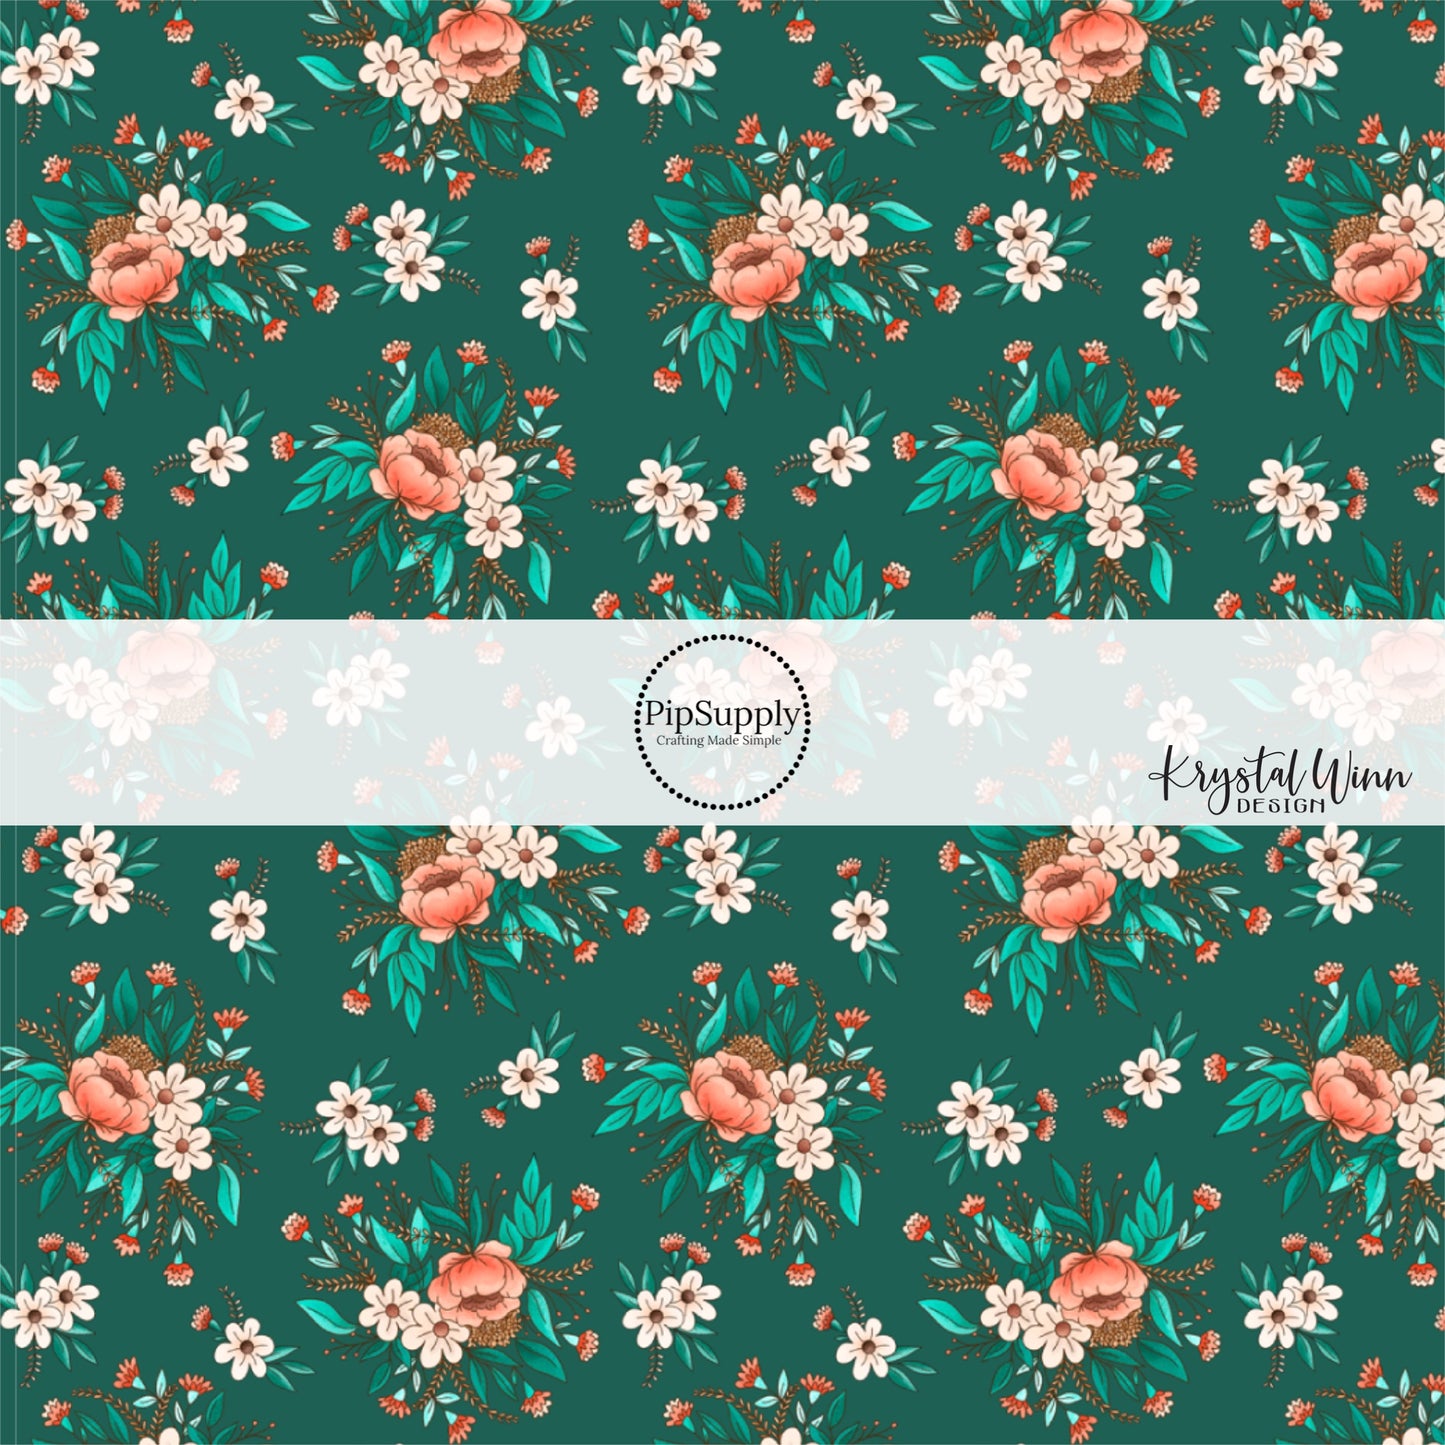 Green fabric by the yard with peach and white colored floral designs - Western Floral Cowgirl Fabric 